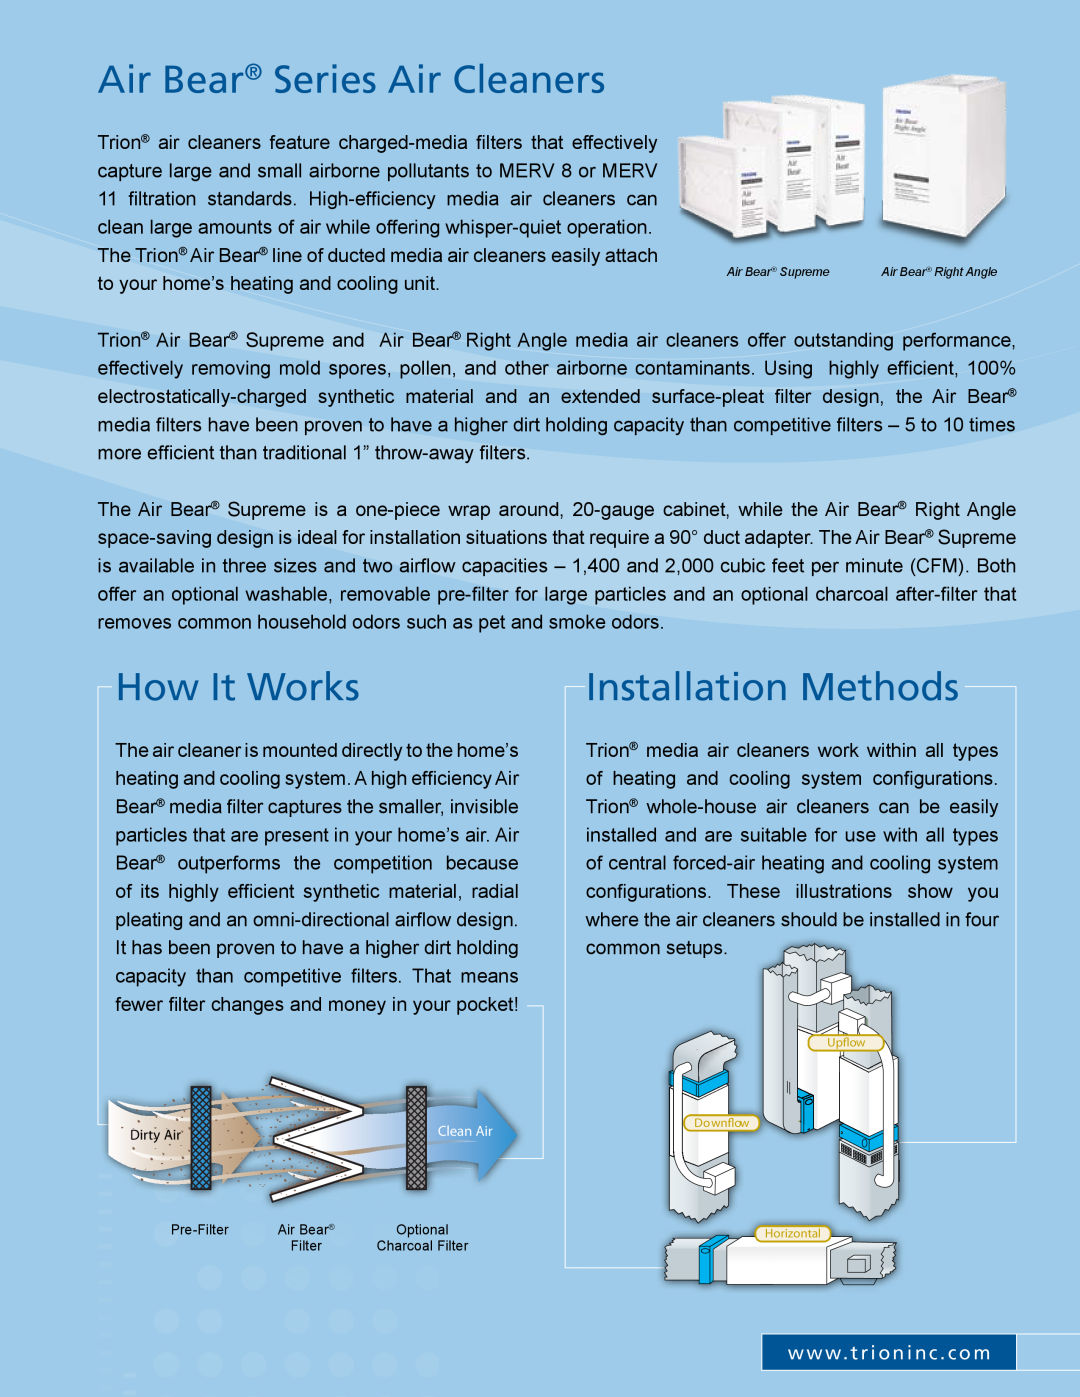 Trion manual Air Bear Series Air Cleaners, How It Works, Installation Methods, to your home’s heating and cooling unit 